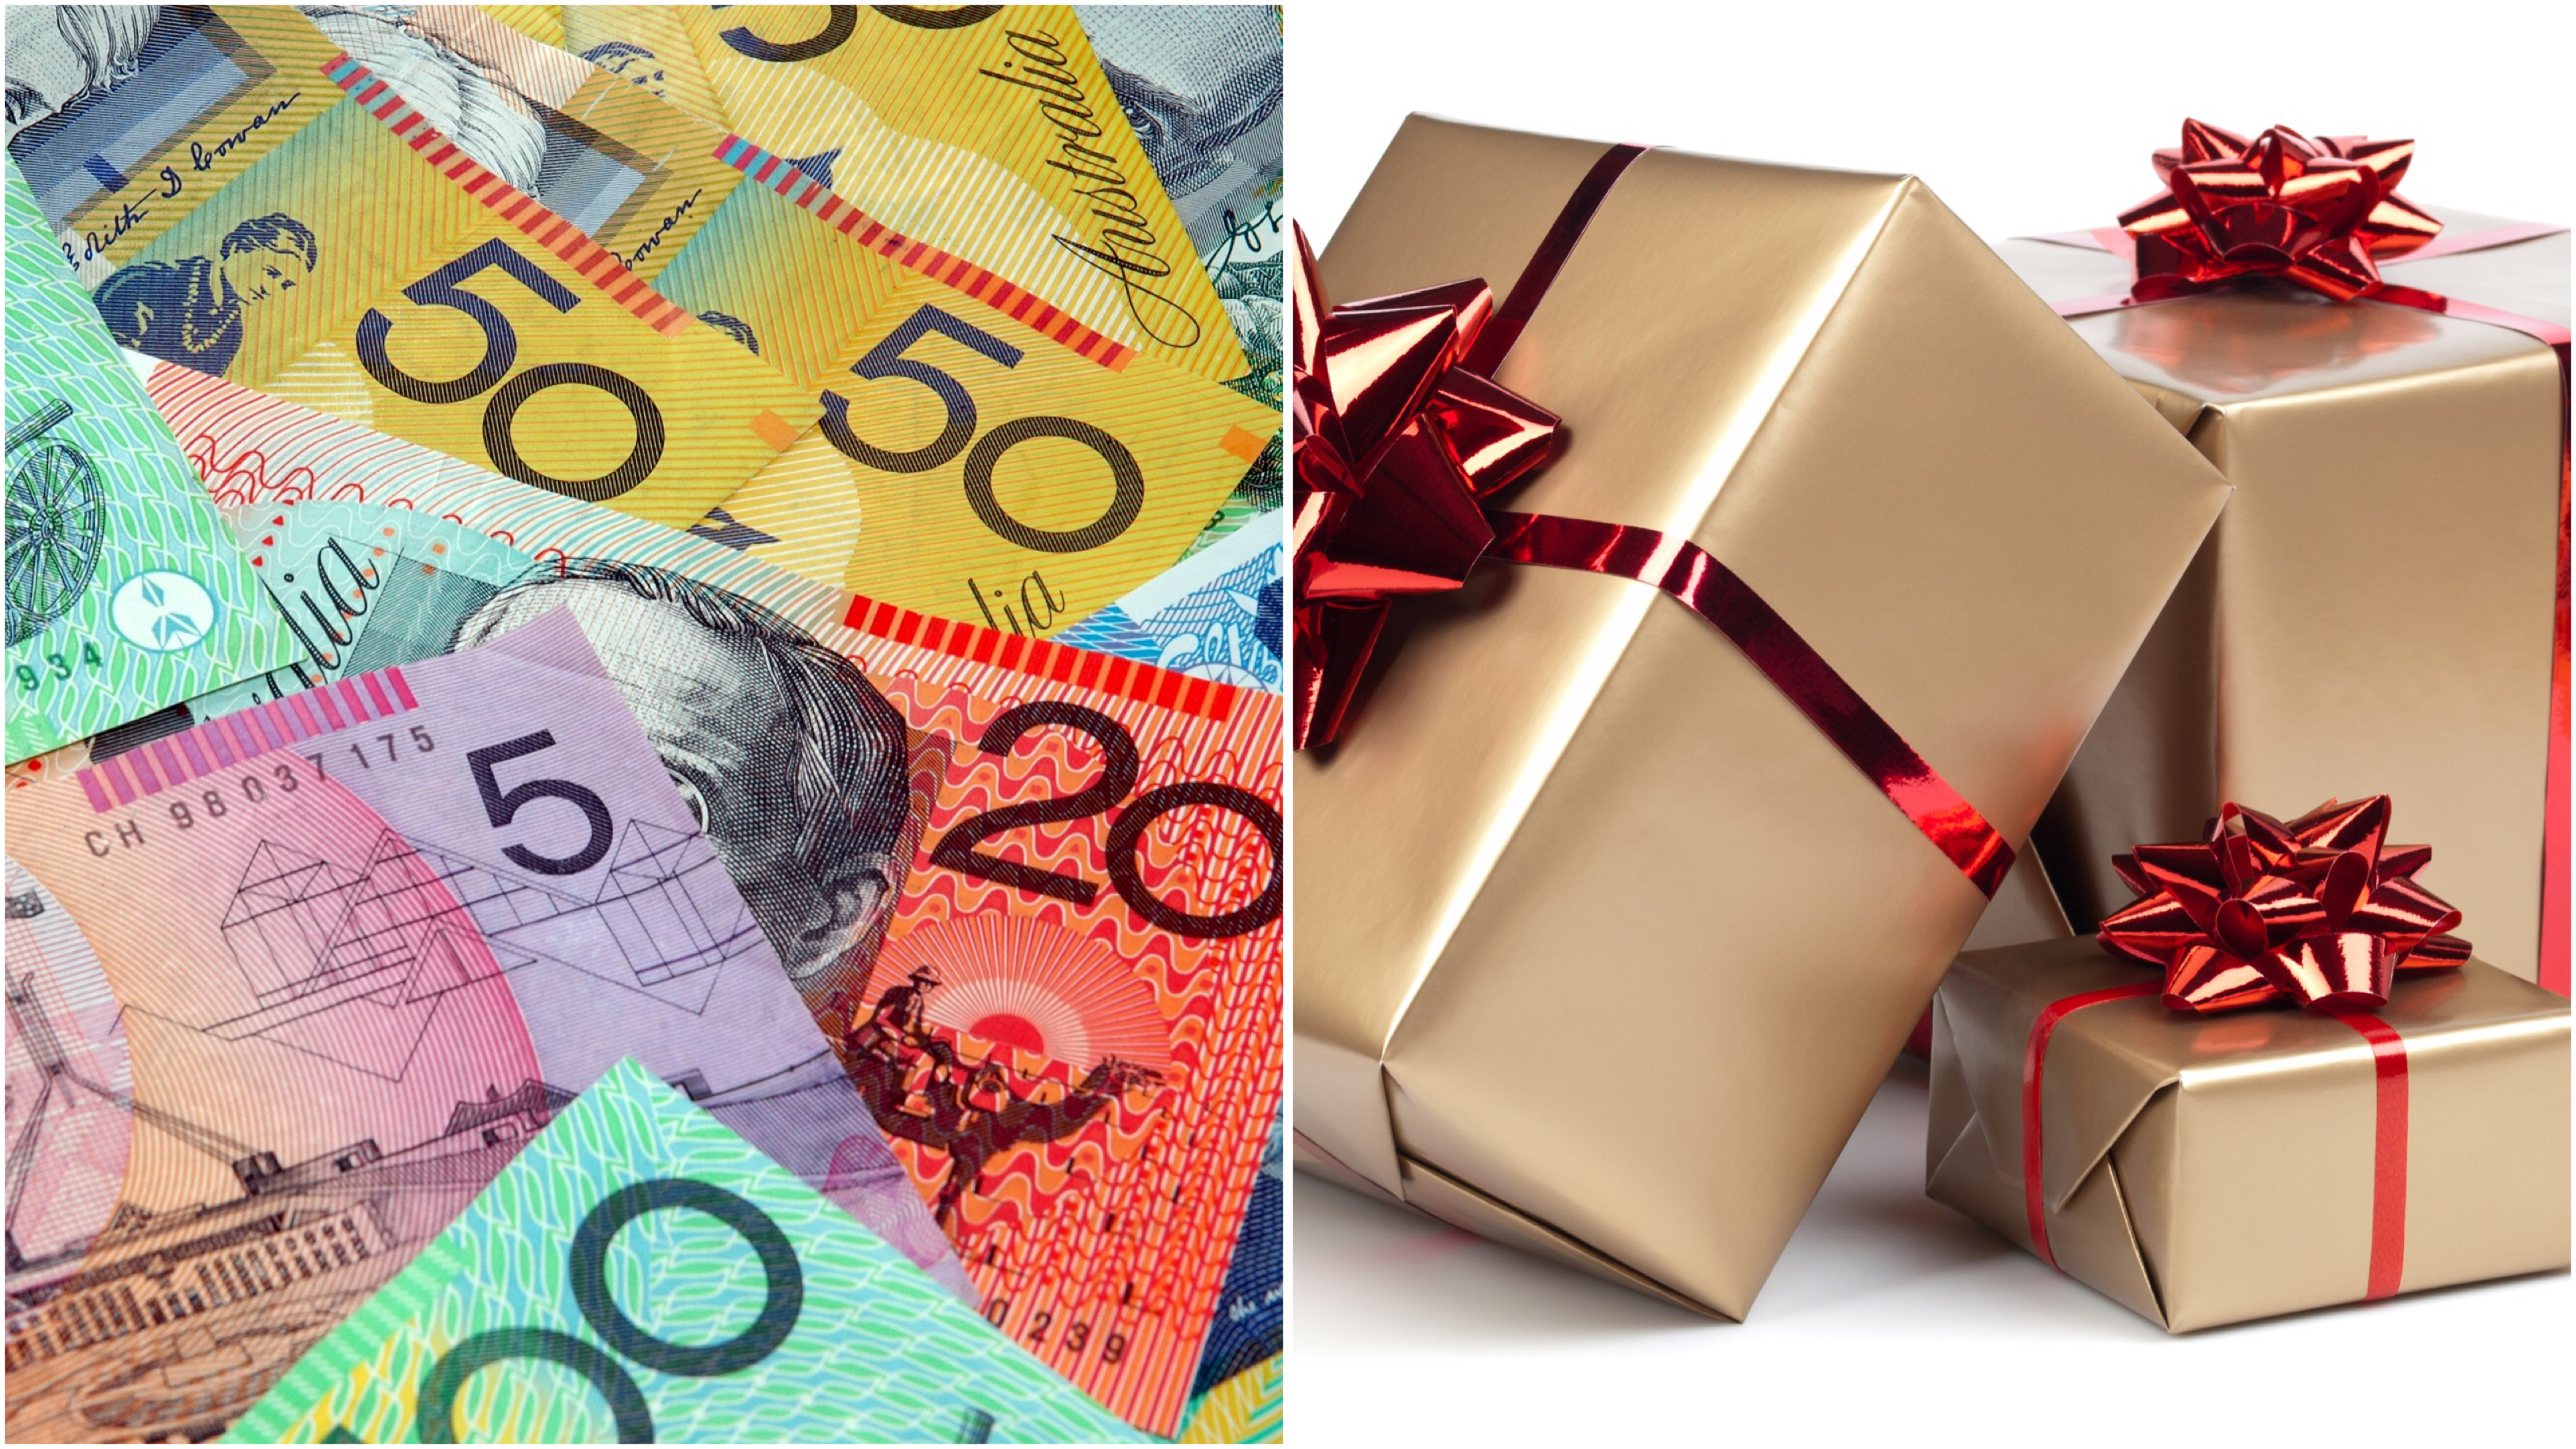 Australians are forecast to spend a record $50 billion this holiday season.